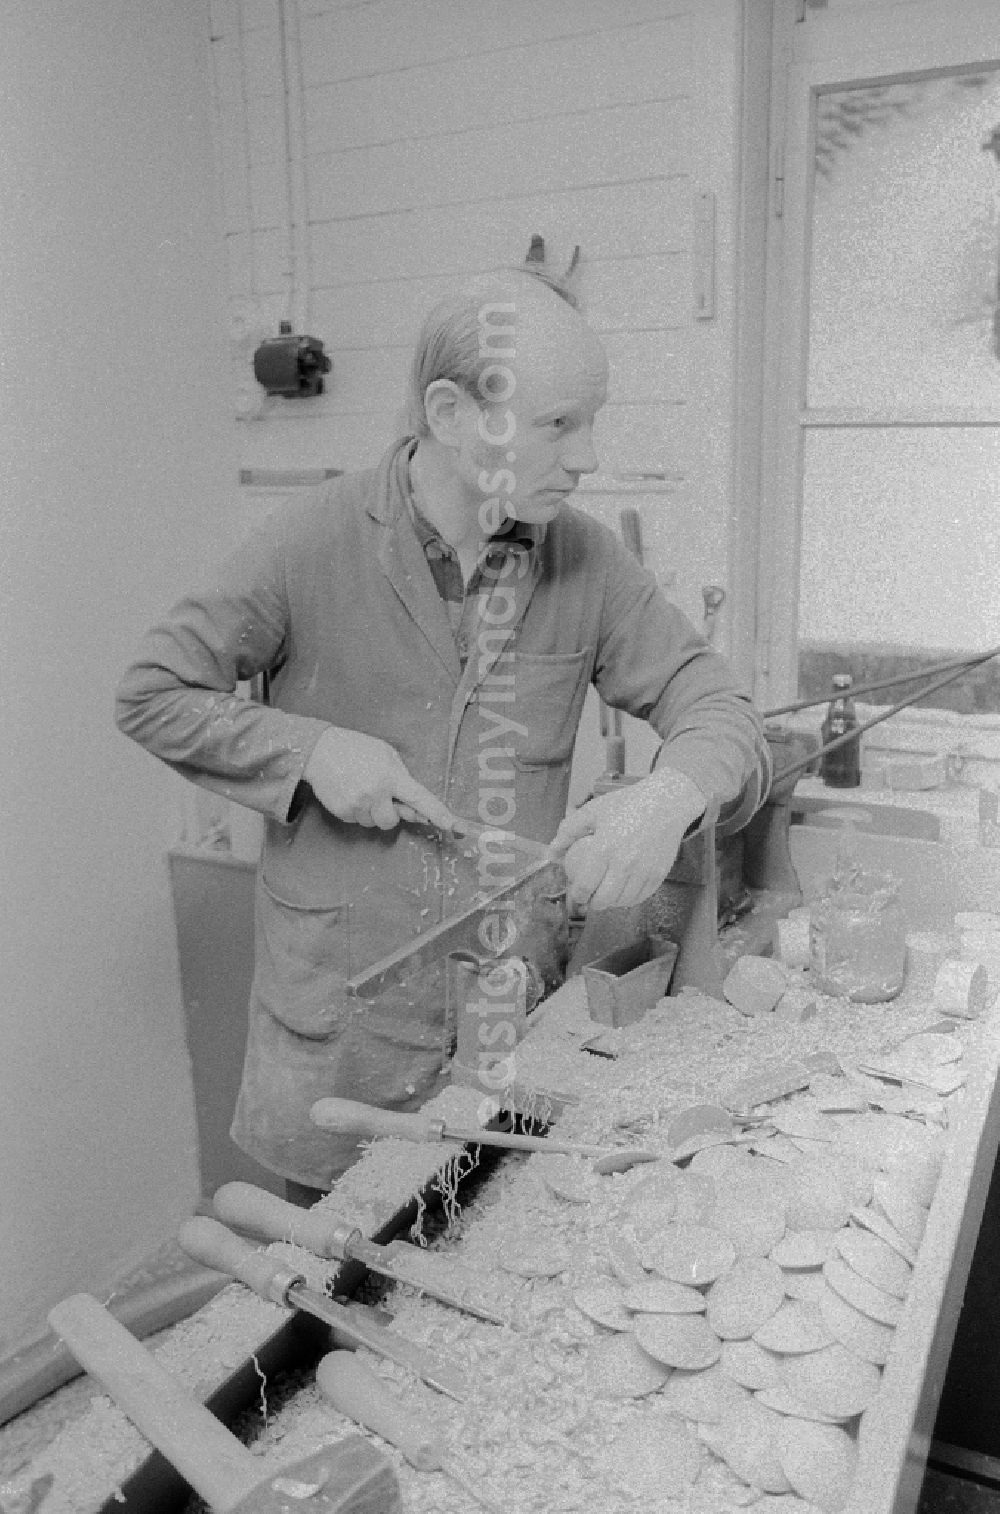 GDR photo archive: Seiffen - Wood turner in the production of nut crackers in the workshops VERO in the health resort Seiffen in the federal state Saxony in the area of the former GDR, German democratic republic